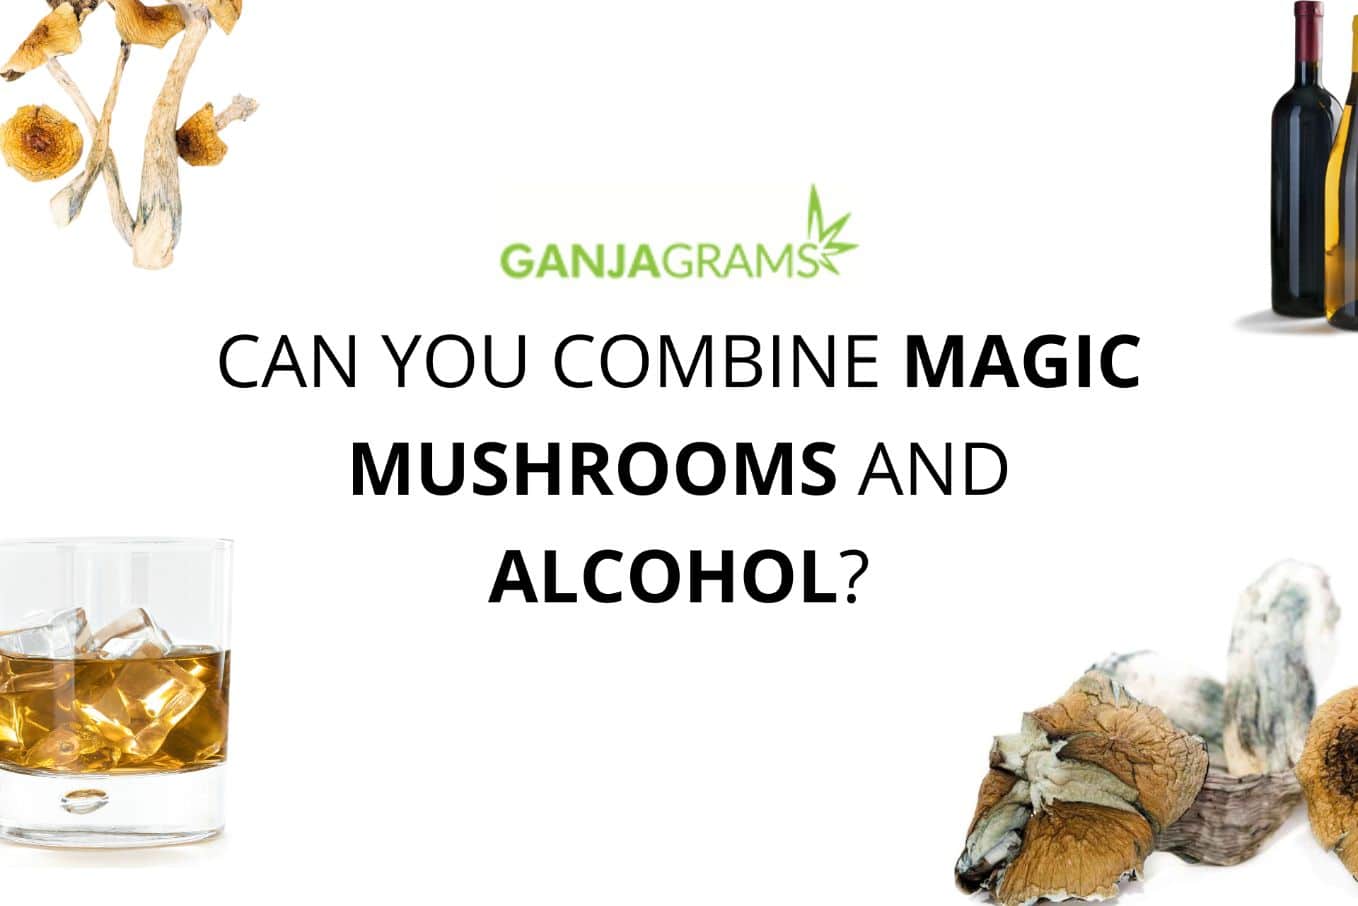 Shrooms and alcohol